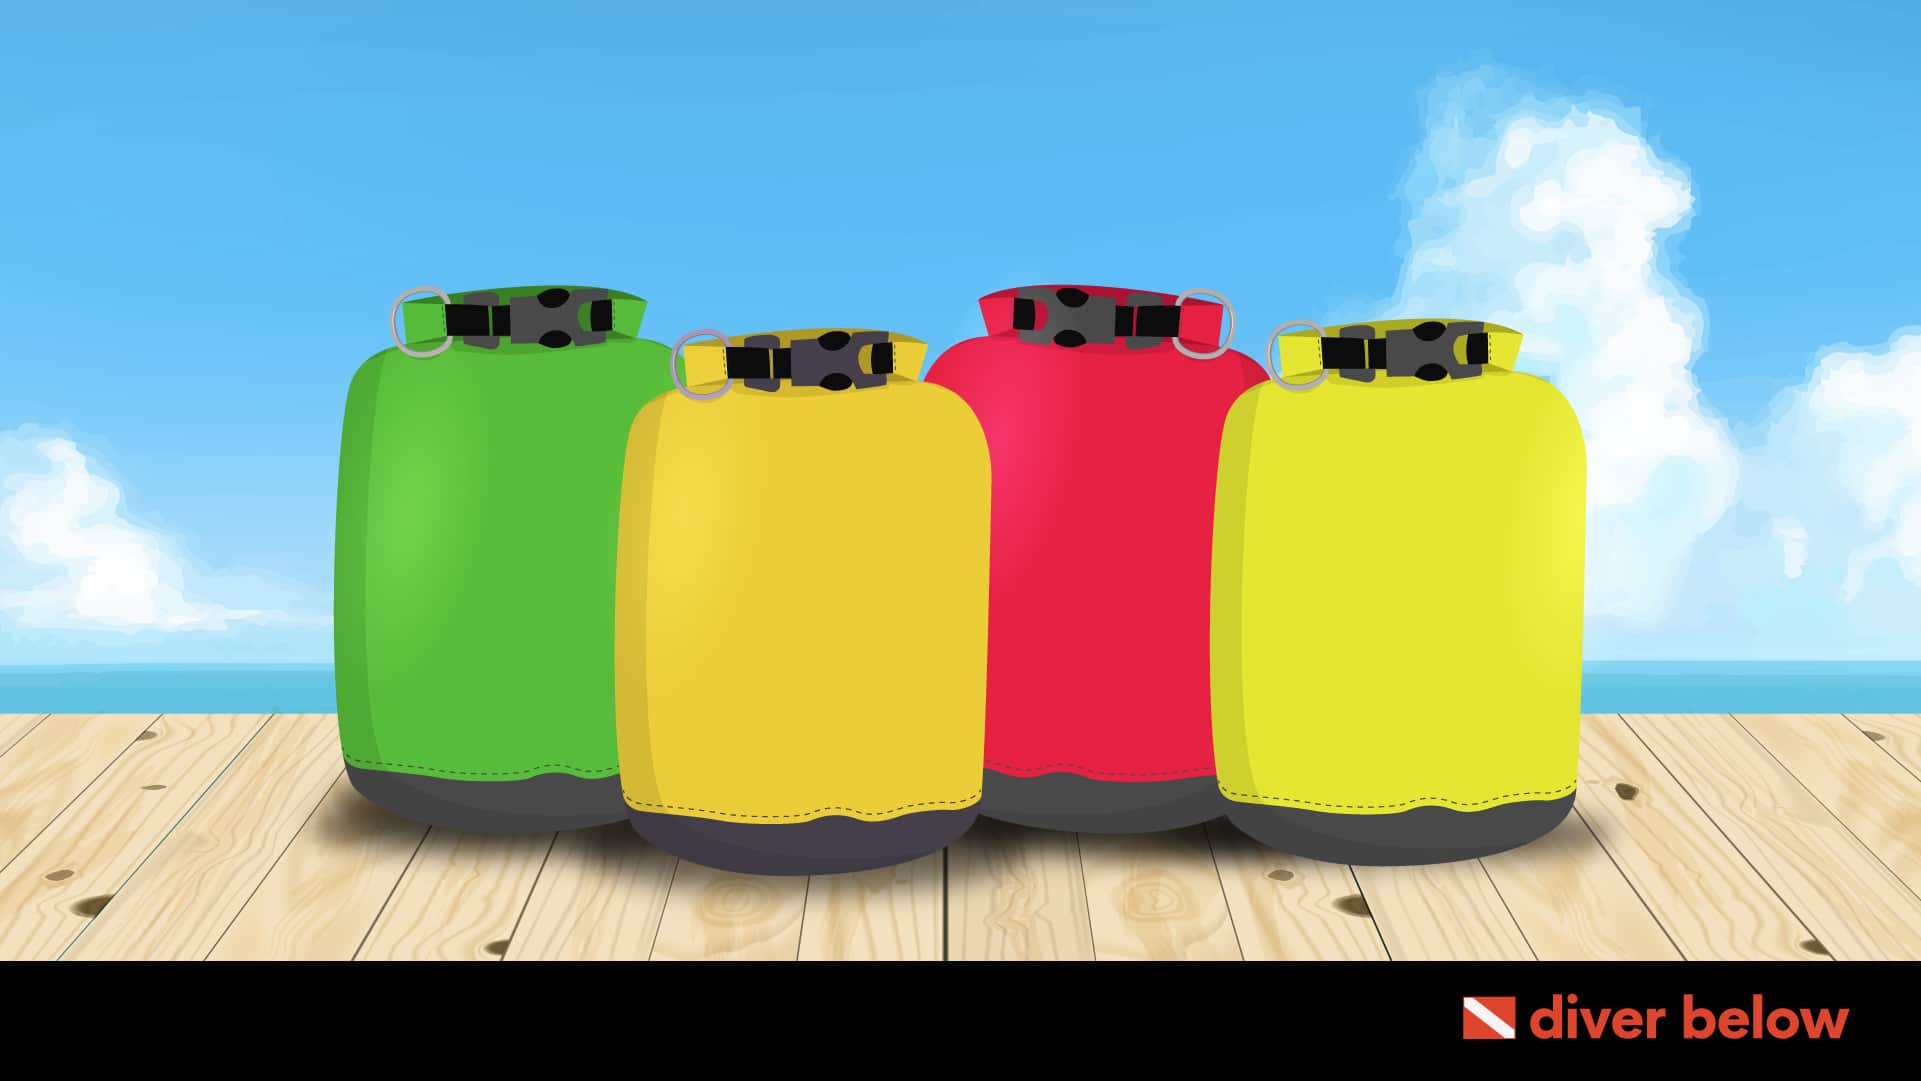 vector graphic showing 4 of the best dry bags lined up side by side on a beach